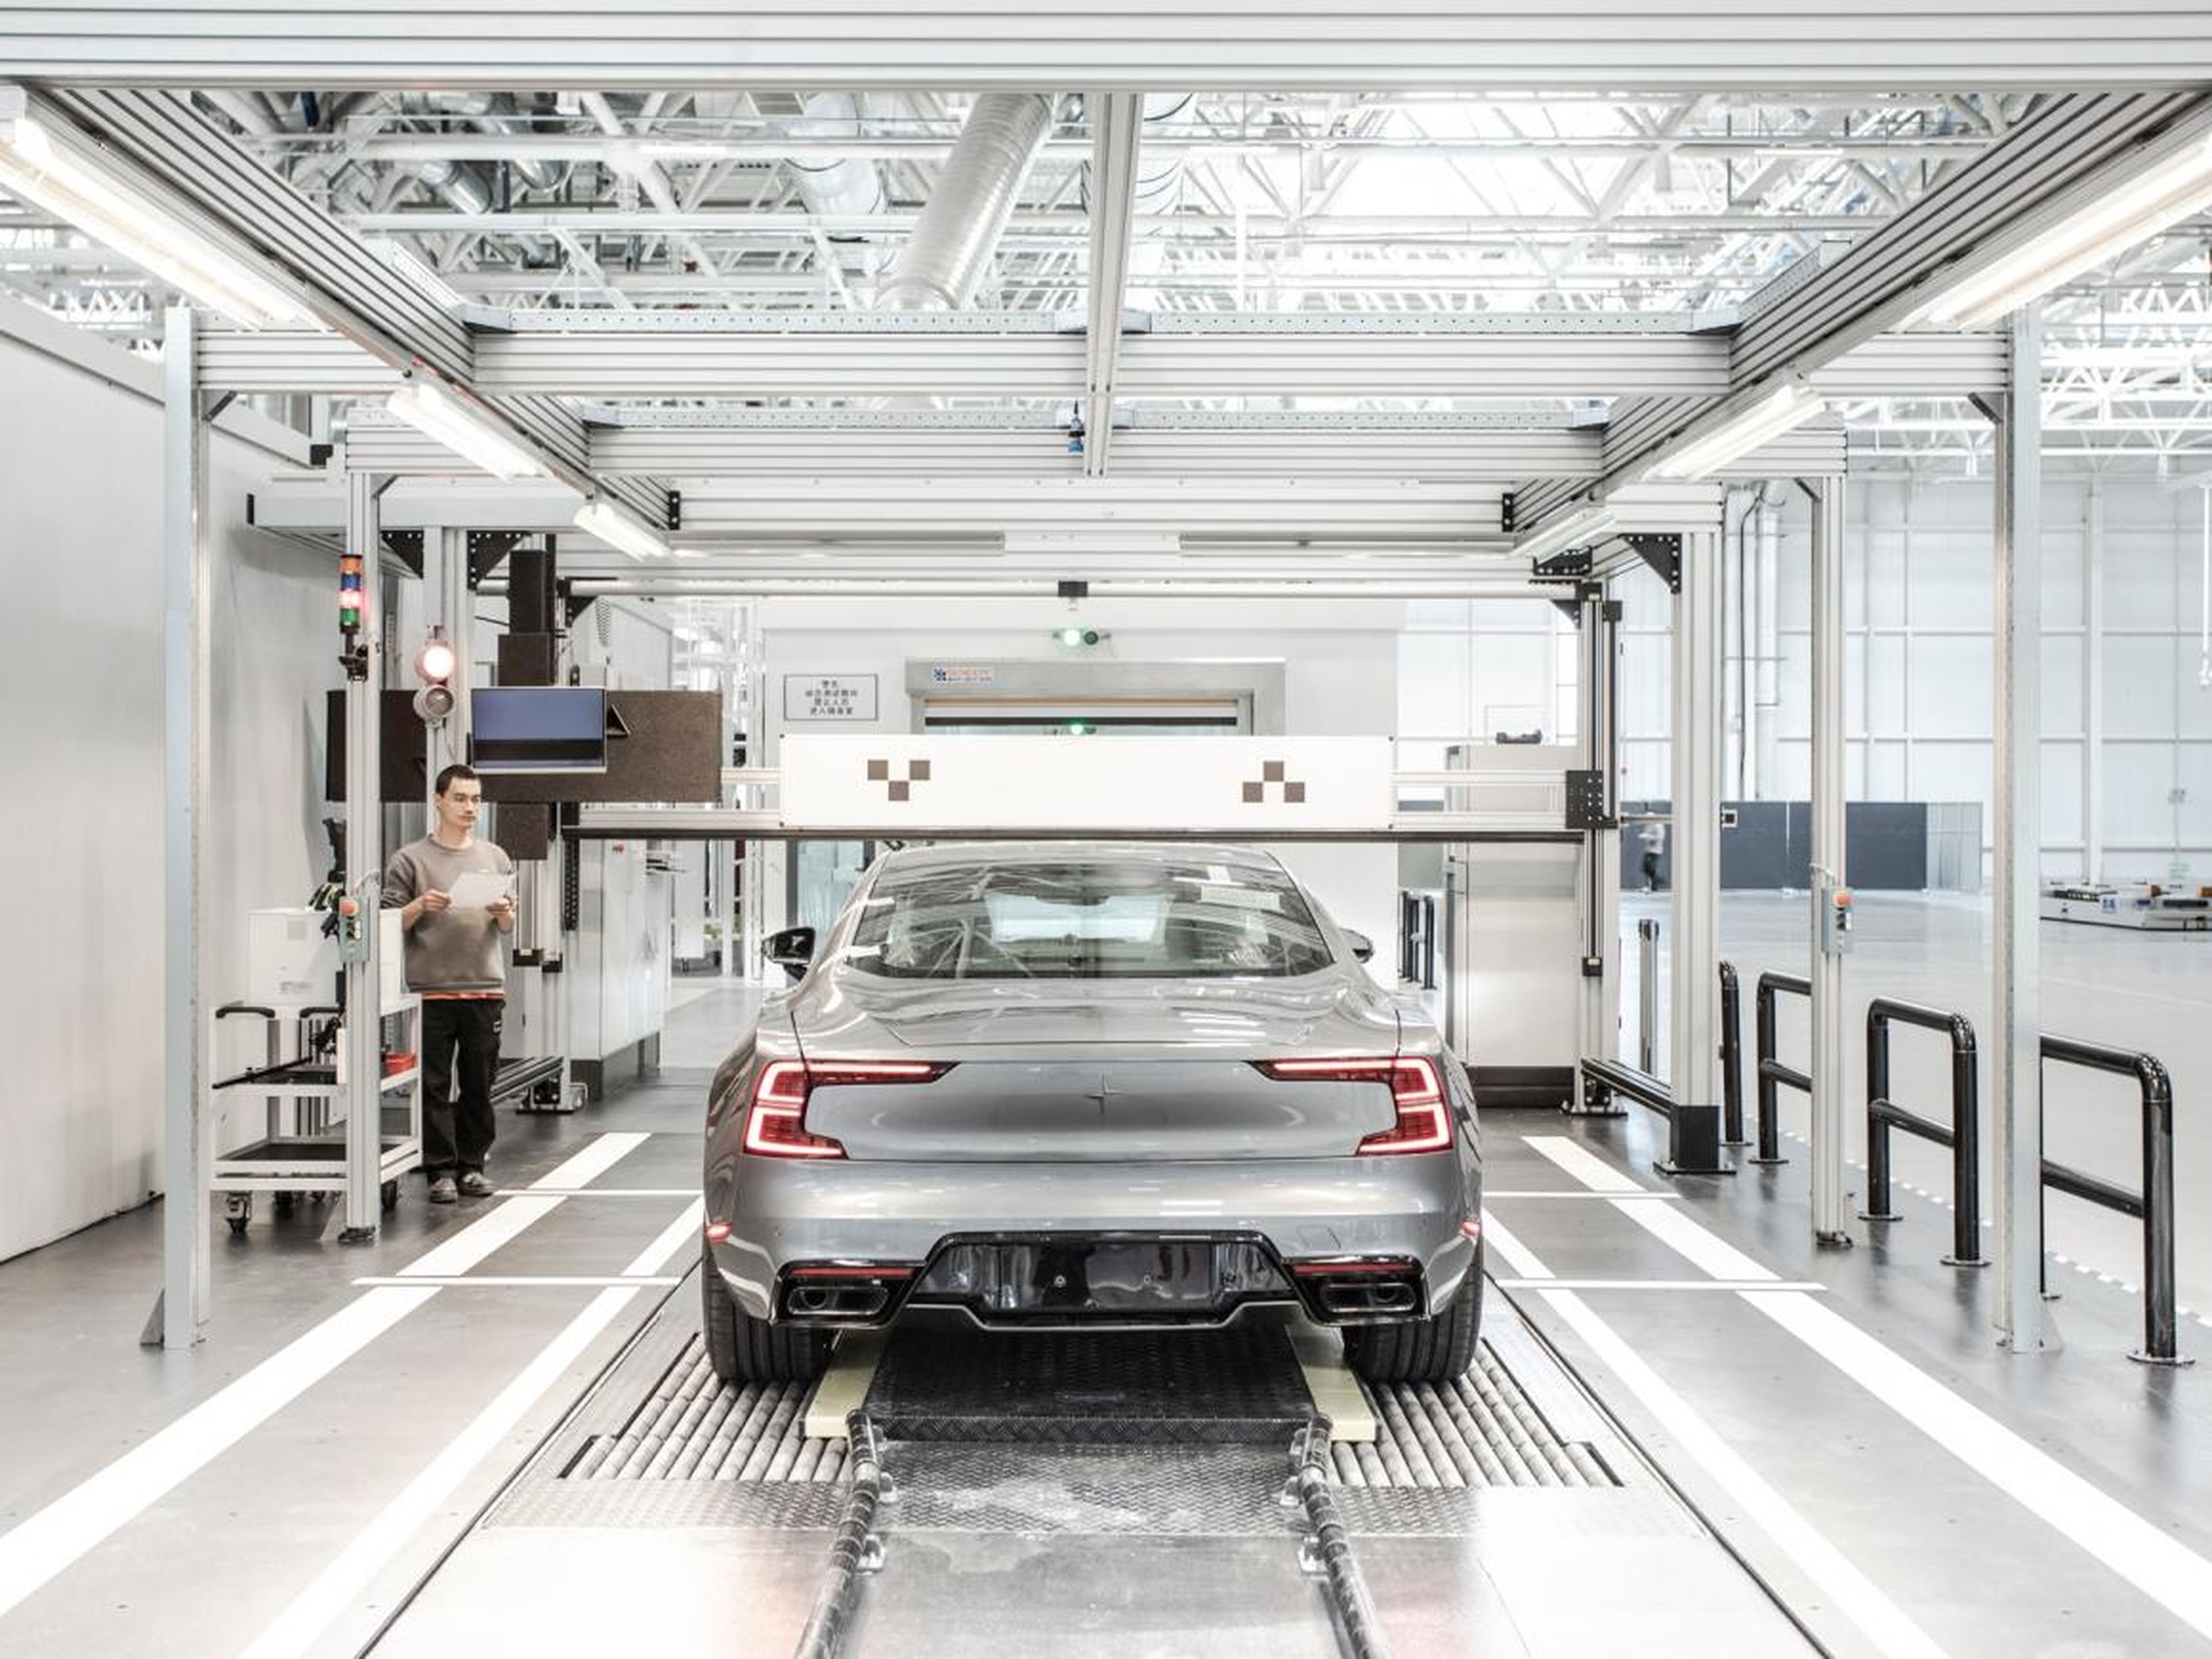 Around 500 Polestar 1 cars will be built per year in the facility. The car has a three-year production cycle.